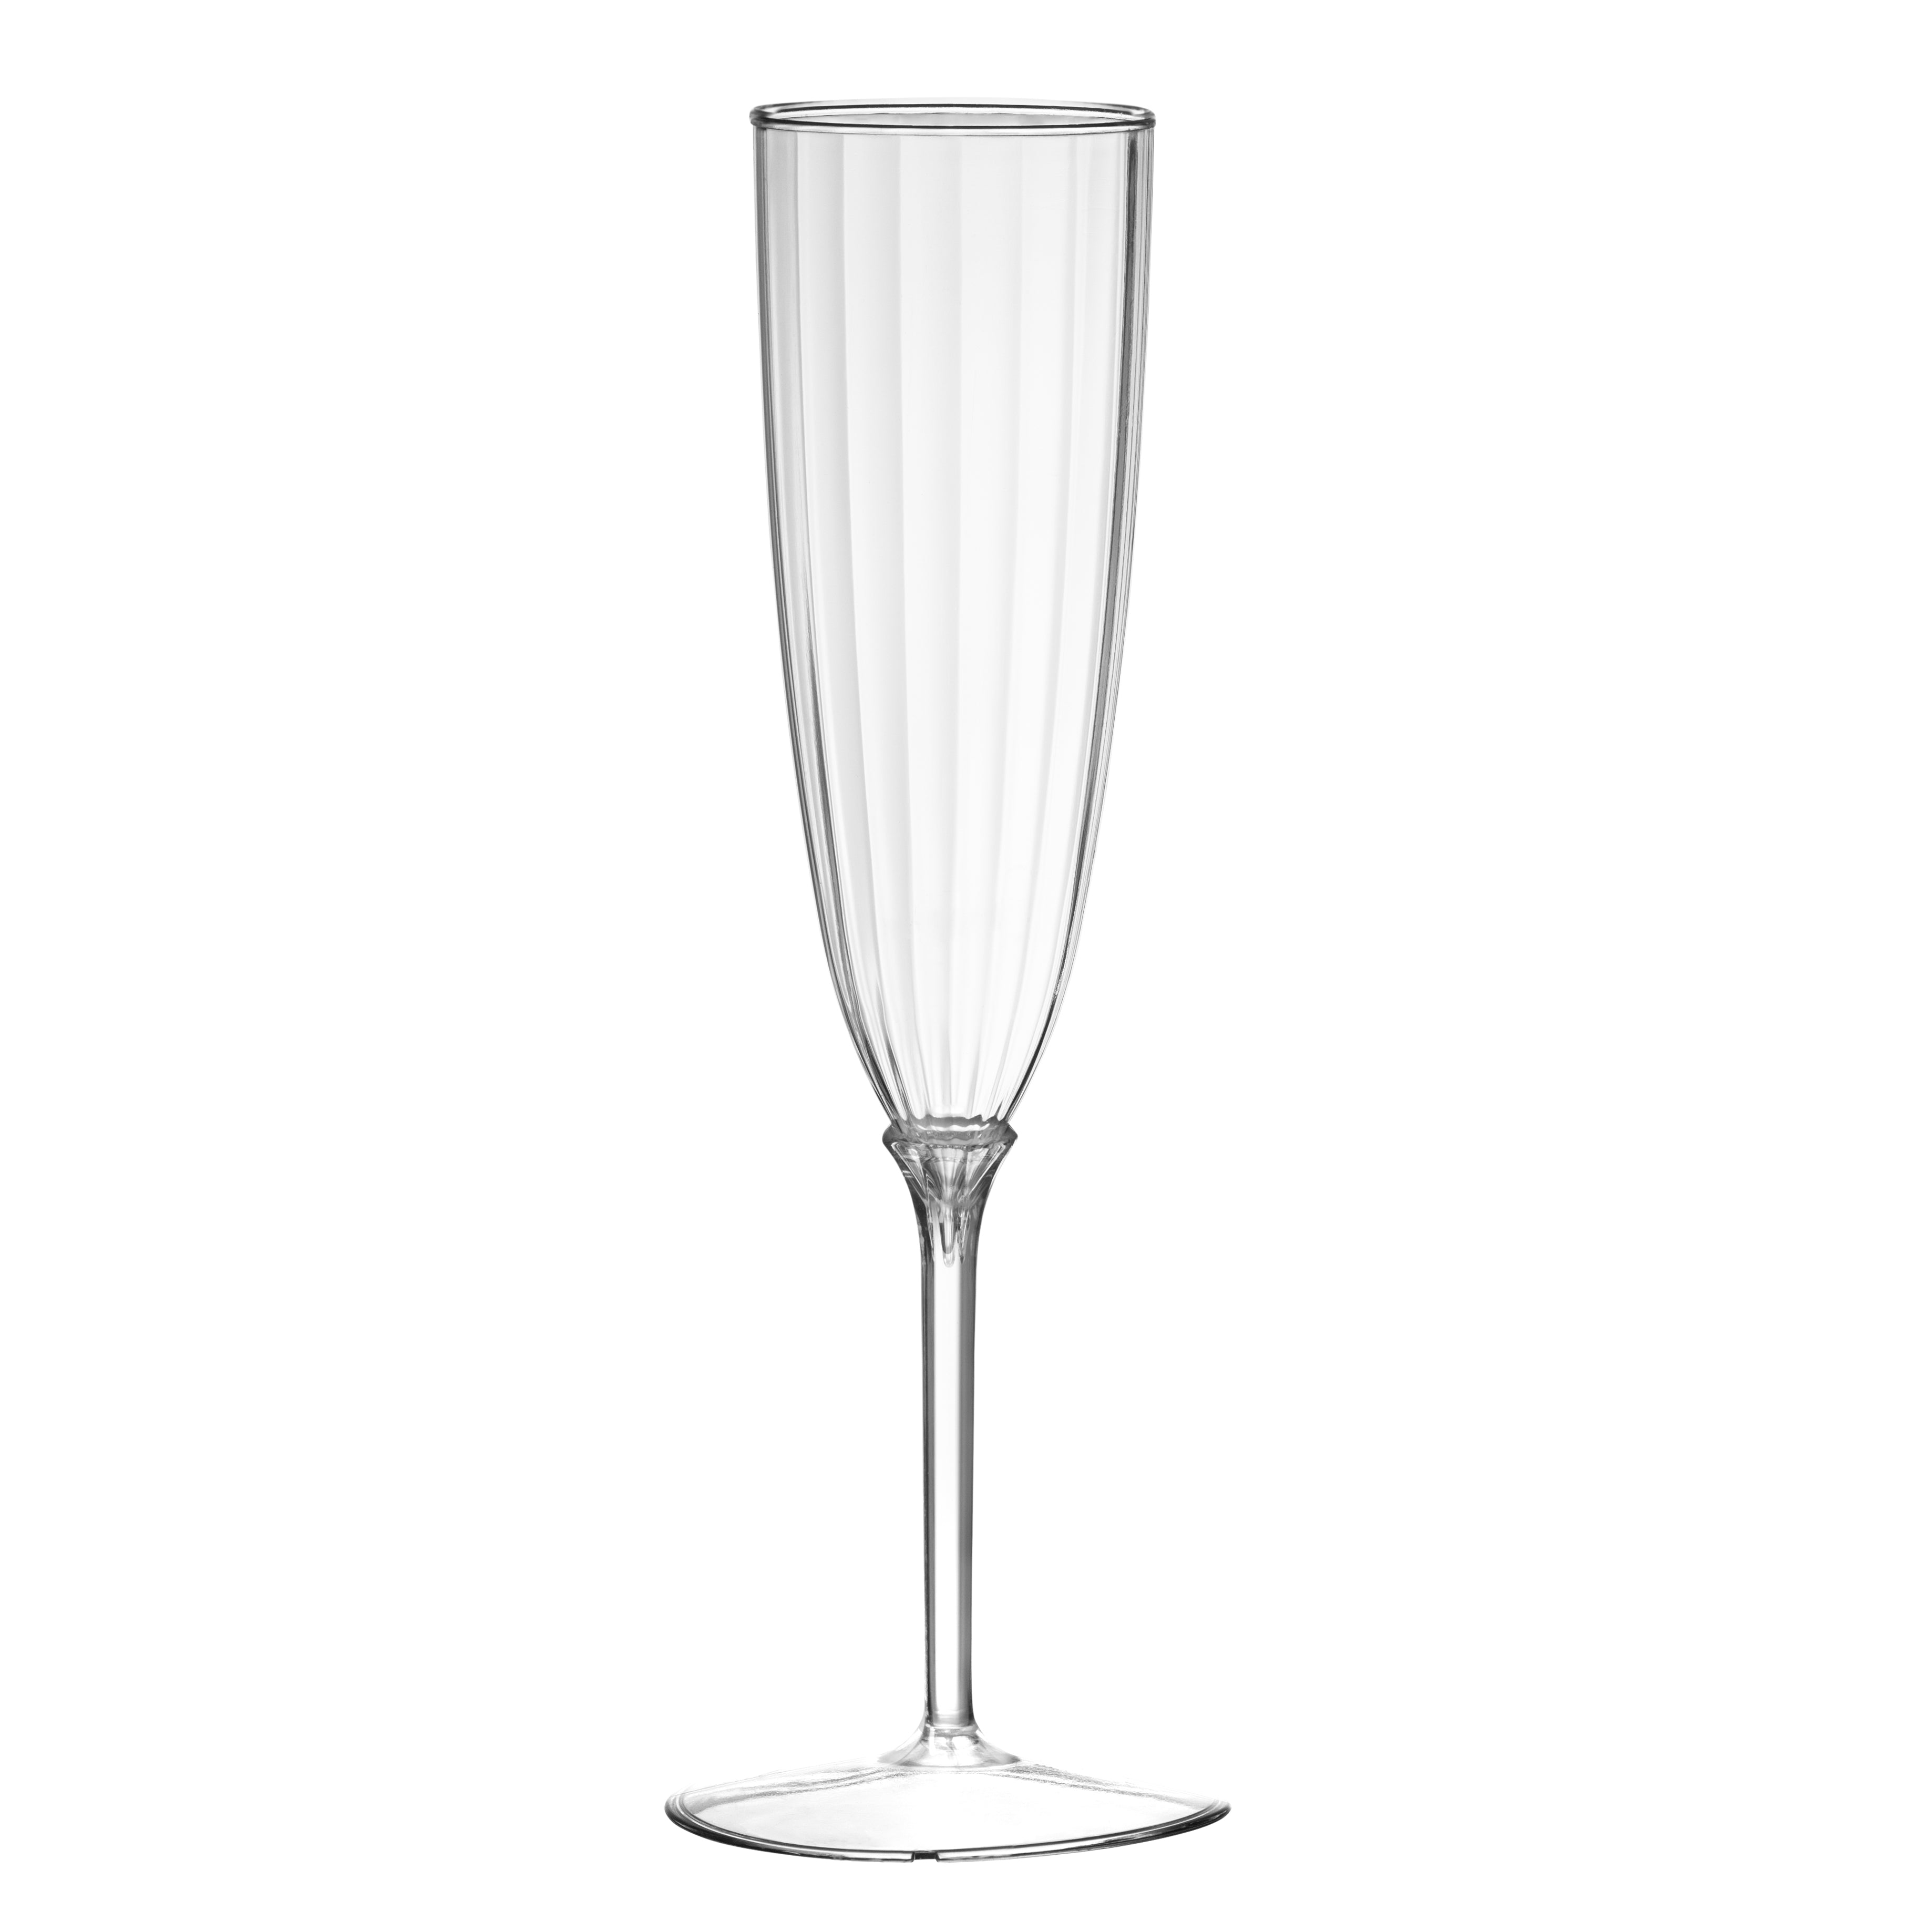 Fluted Disposable Champagne Glasses - 6 oz.